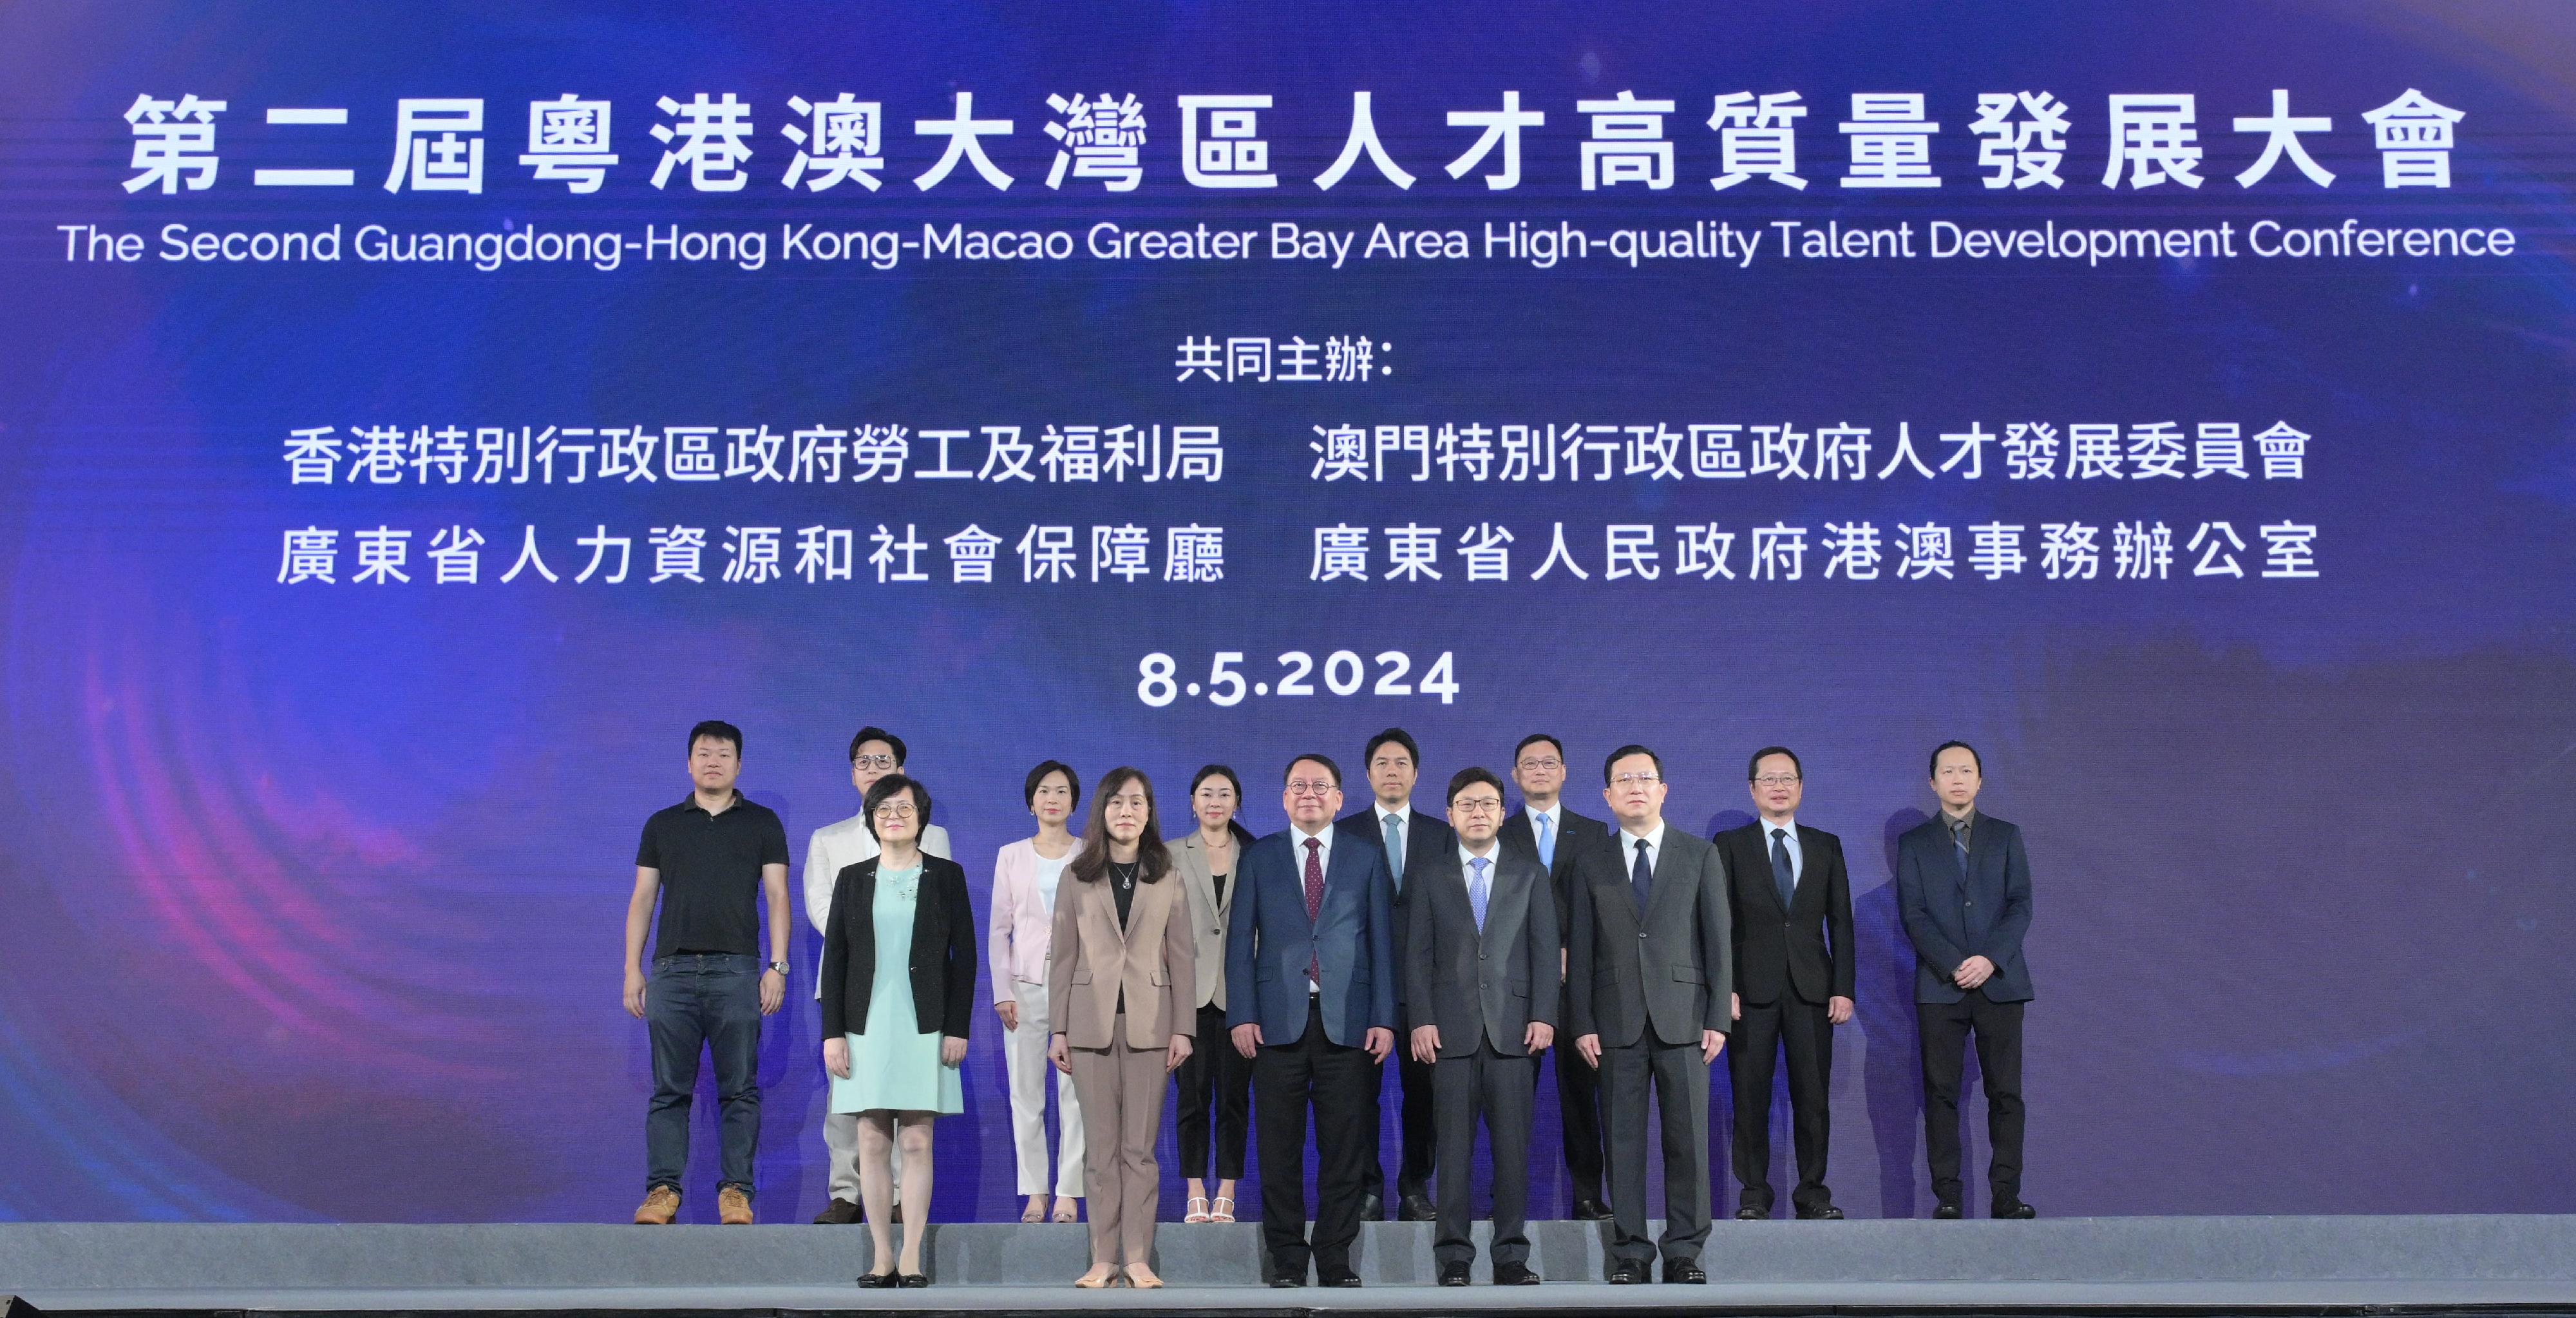 The Chief Secretary for Administration, Mr Chan Kwok-ki, today (May 8) attended the Second Guangdong-Hong Kong-Macao Greater Bay Area High-quality Talent Development Conference. Photo shows (front row, from left) the Director-General of the Hong Kong and Macao Affairs Office of the People's Government of Guangdong Province, Ms Chen Liwen; the Secretary for Social Affairs and Culture of the Macao Special Administrative Region, Ms Ao Ieong U; Mr Chan; the Secretary for Labour and Welfare, Mr Chris Sun; and the Director-General of the Human Resources and Social Security Department of Guangdong Province, Mr Du Minqi, with speakers of various sessions.